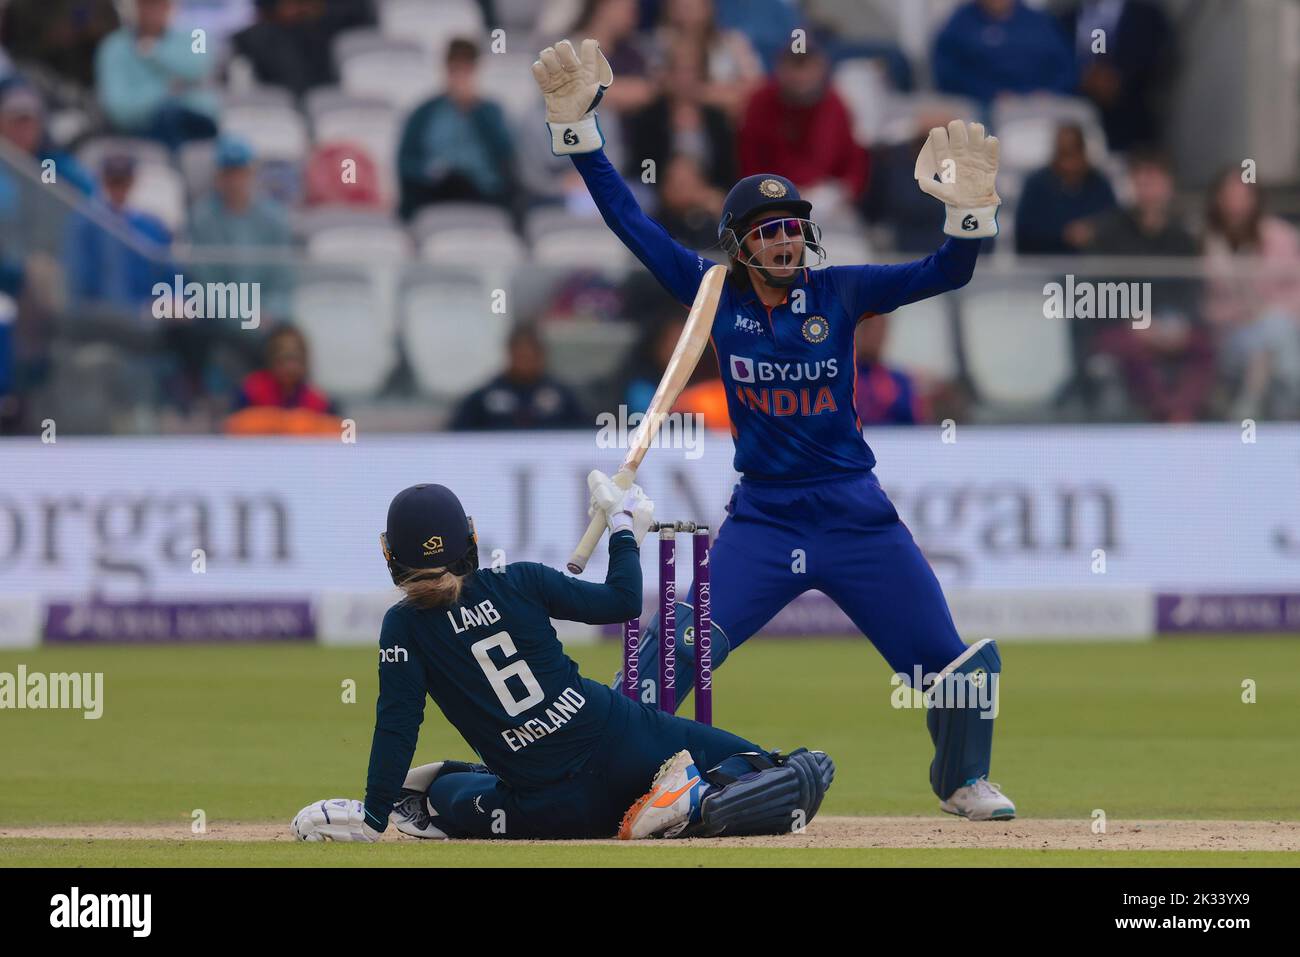 24 September , 2022, London, UK. England’s Emma Lamb batting as England women take on India in the 3rd Royal London One Day International at Lords. David Rowe/Alamy Live News. Stock Photo